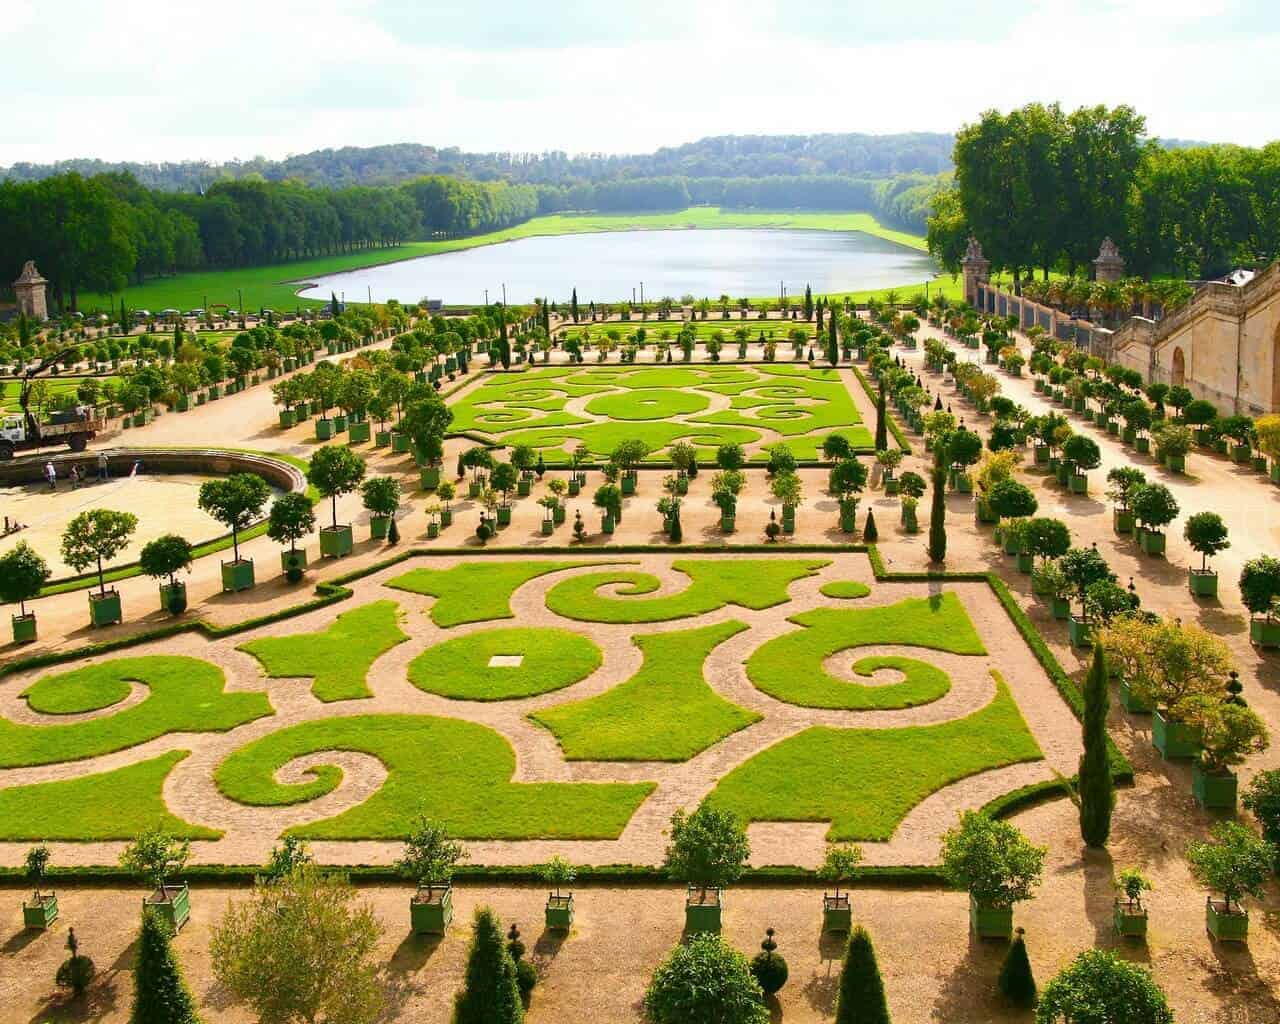 steps to follow for a hassle-free visit to the Chateau de Versailles